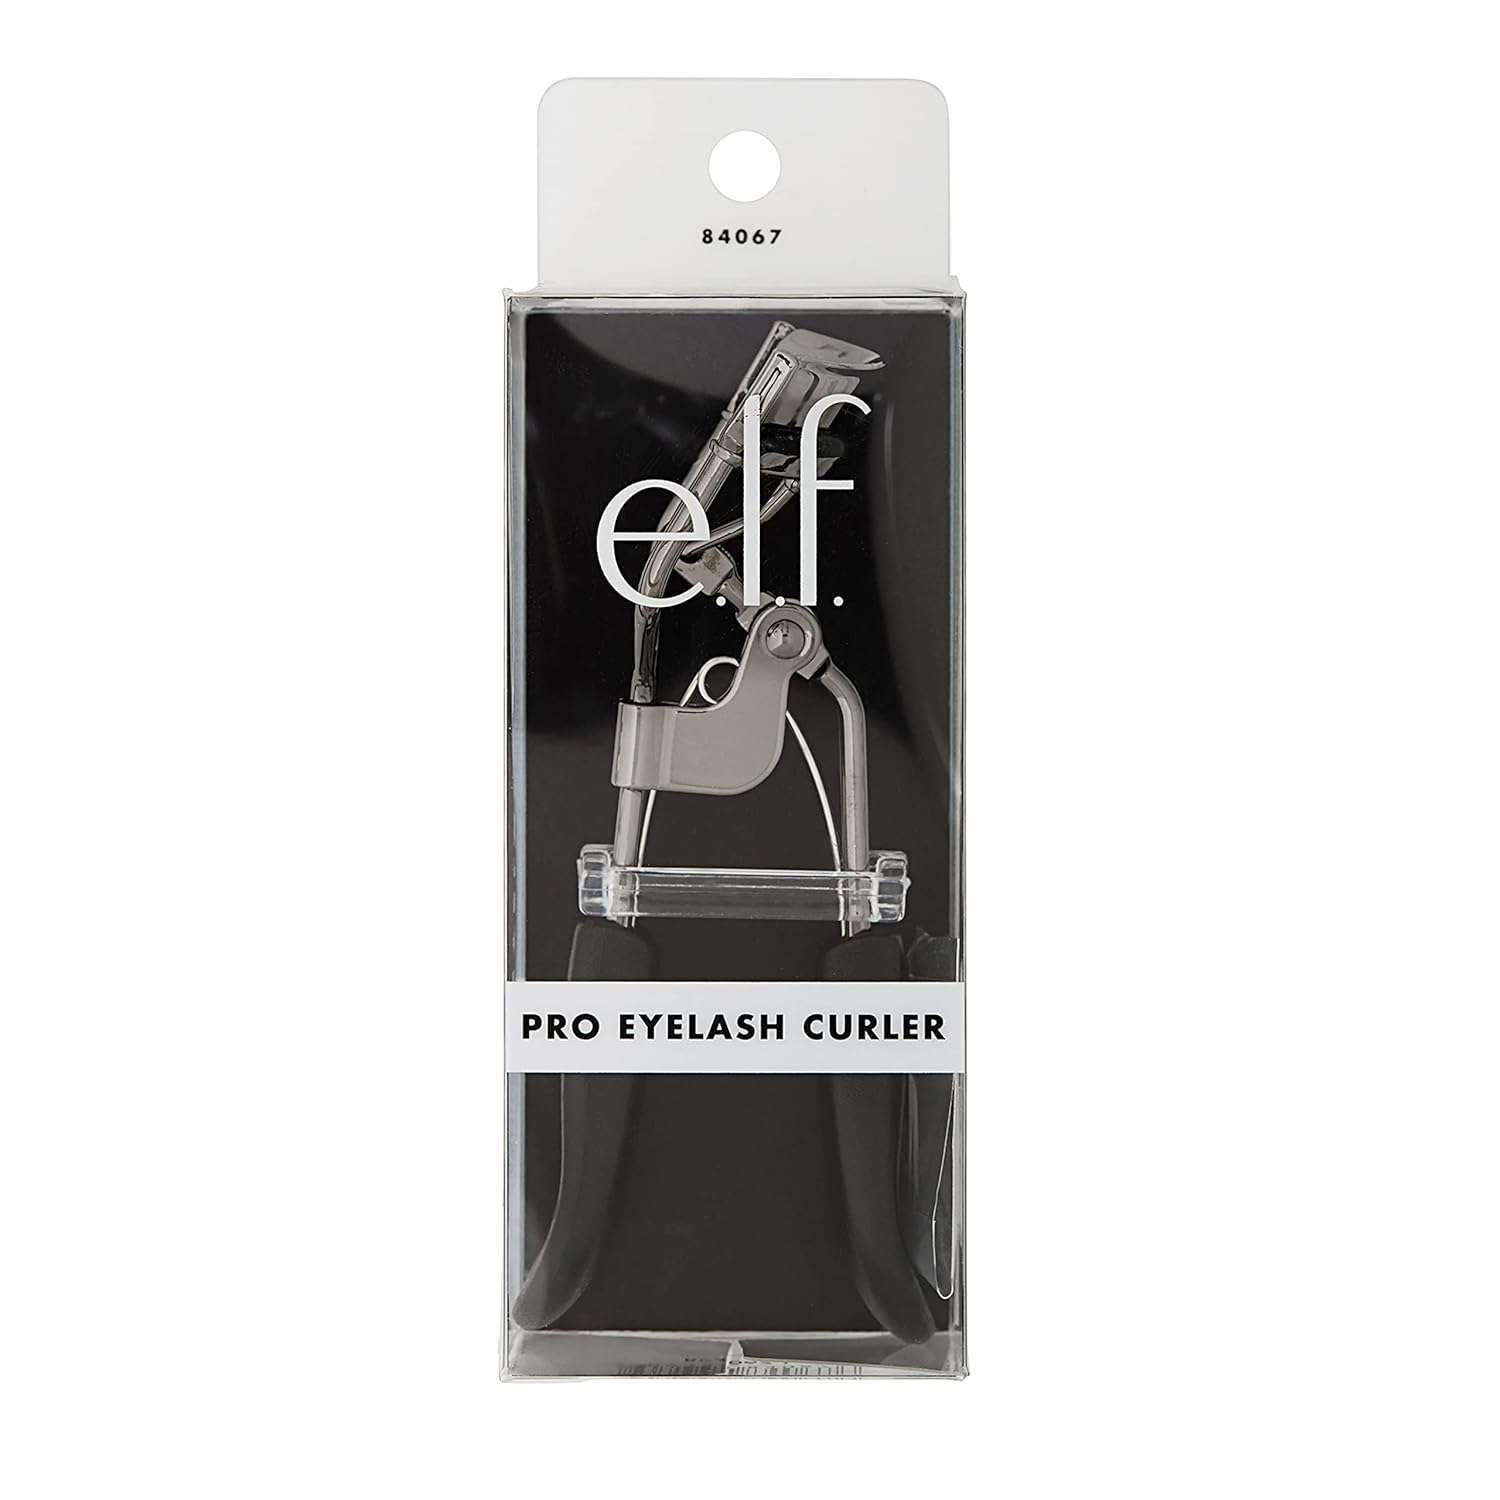 e.l.f. Pro Eyelash Curler, Vegan Makeup Tool, Creates Eye-Opening & Lifted Lashes, Lash Curler Includes Additional Rubber Replacement Pad